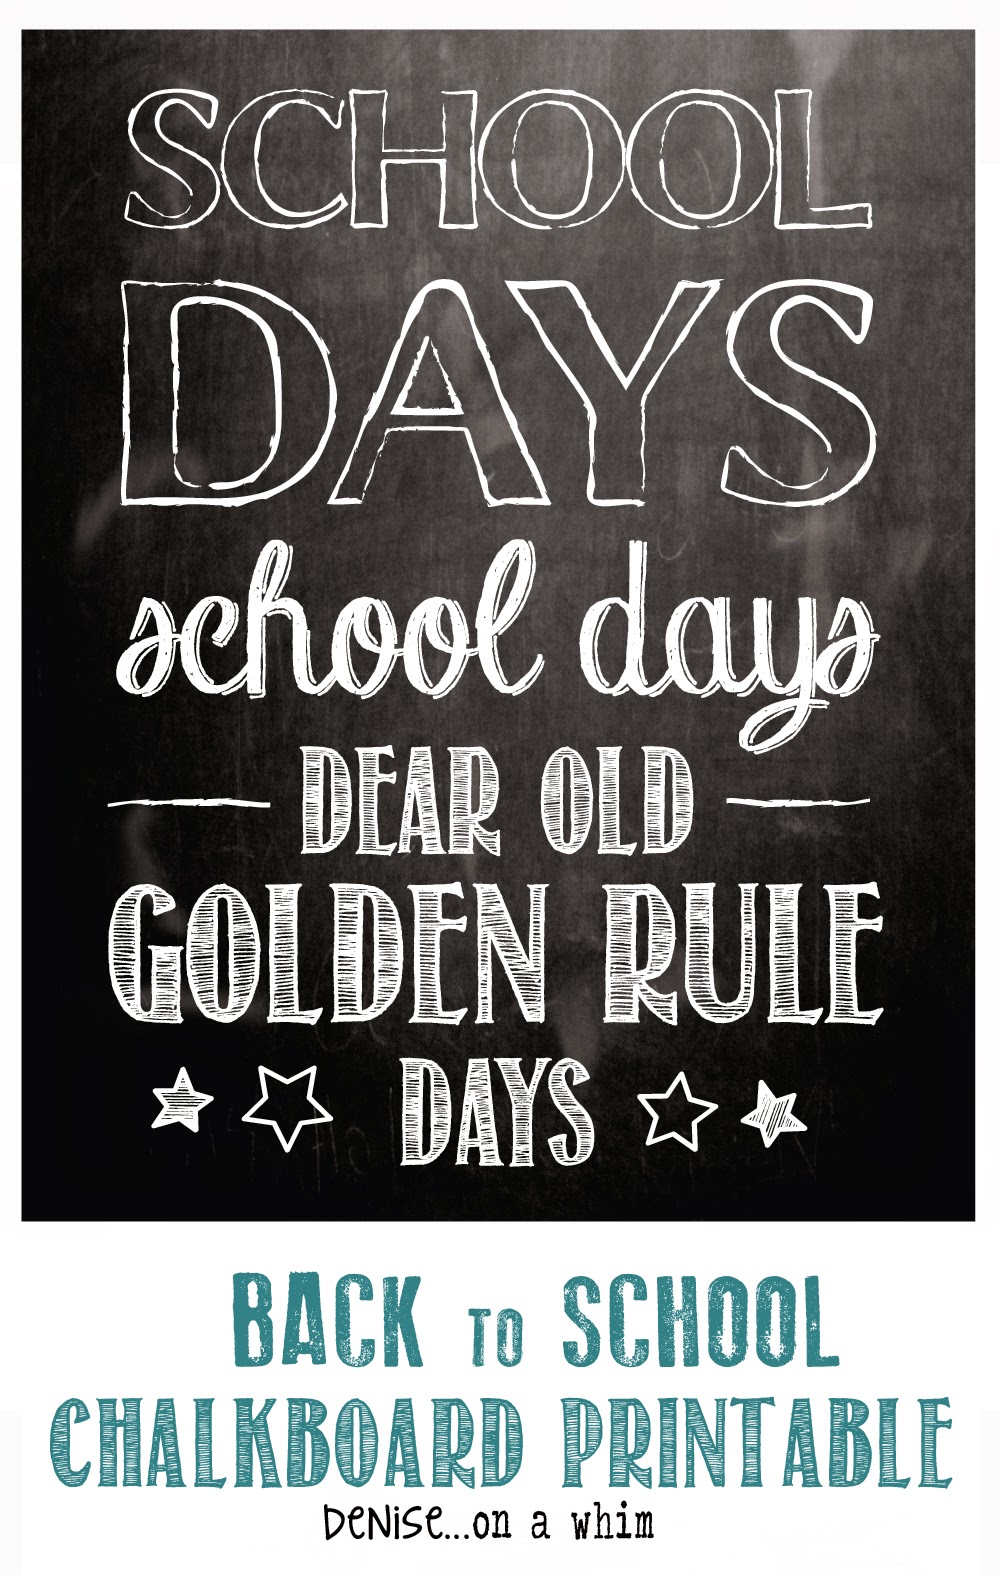 Back to School Chalkboard Printable from Denise on a Whim